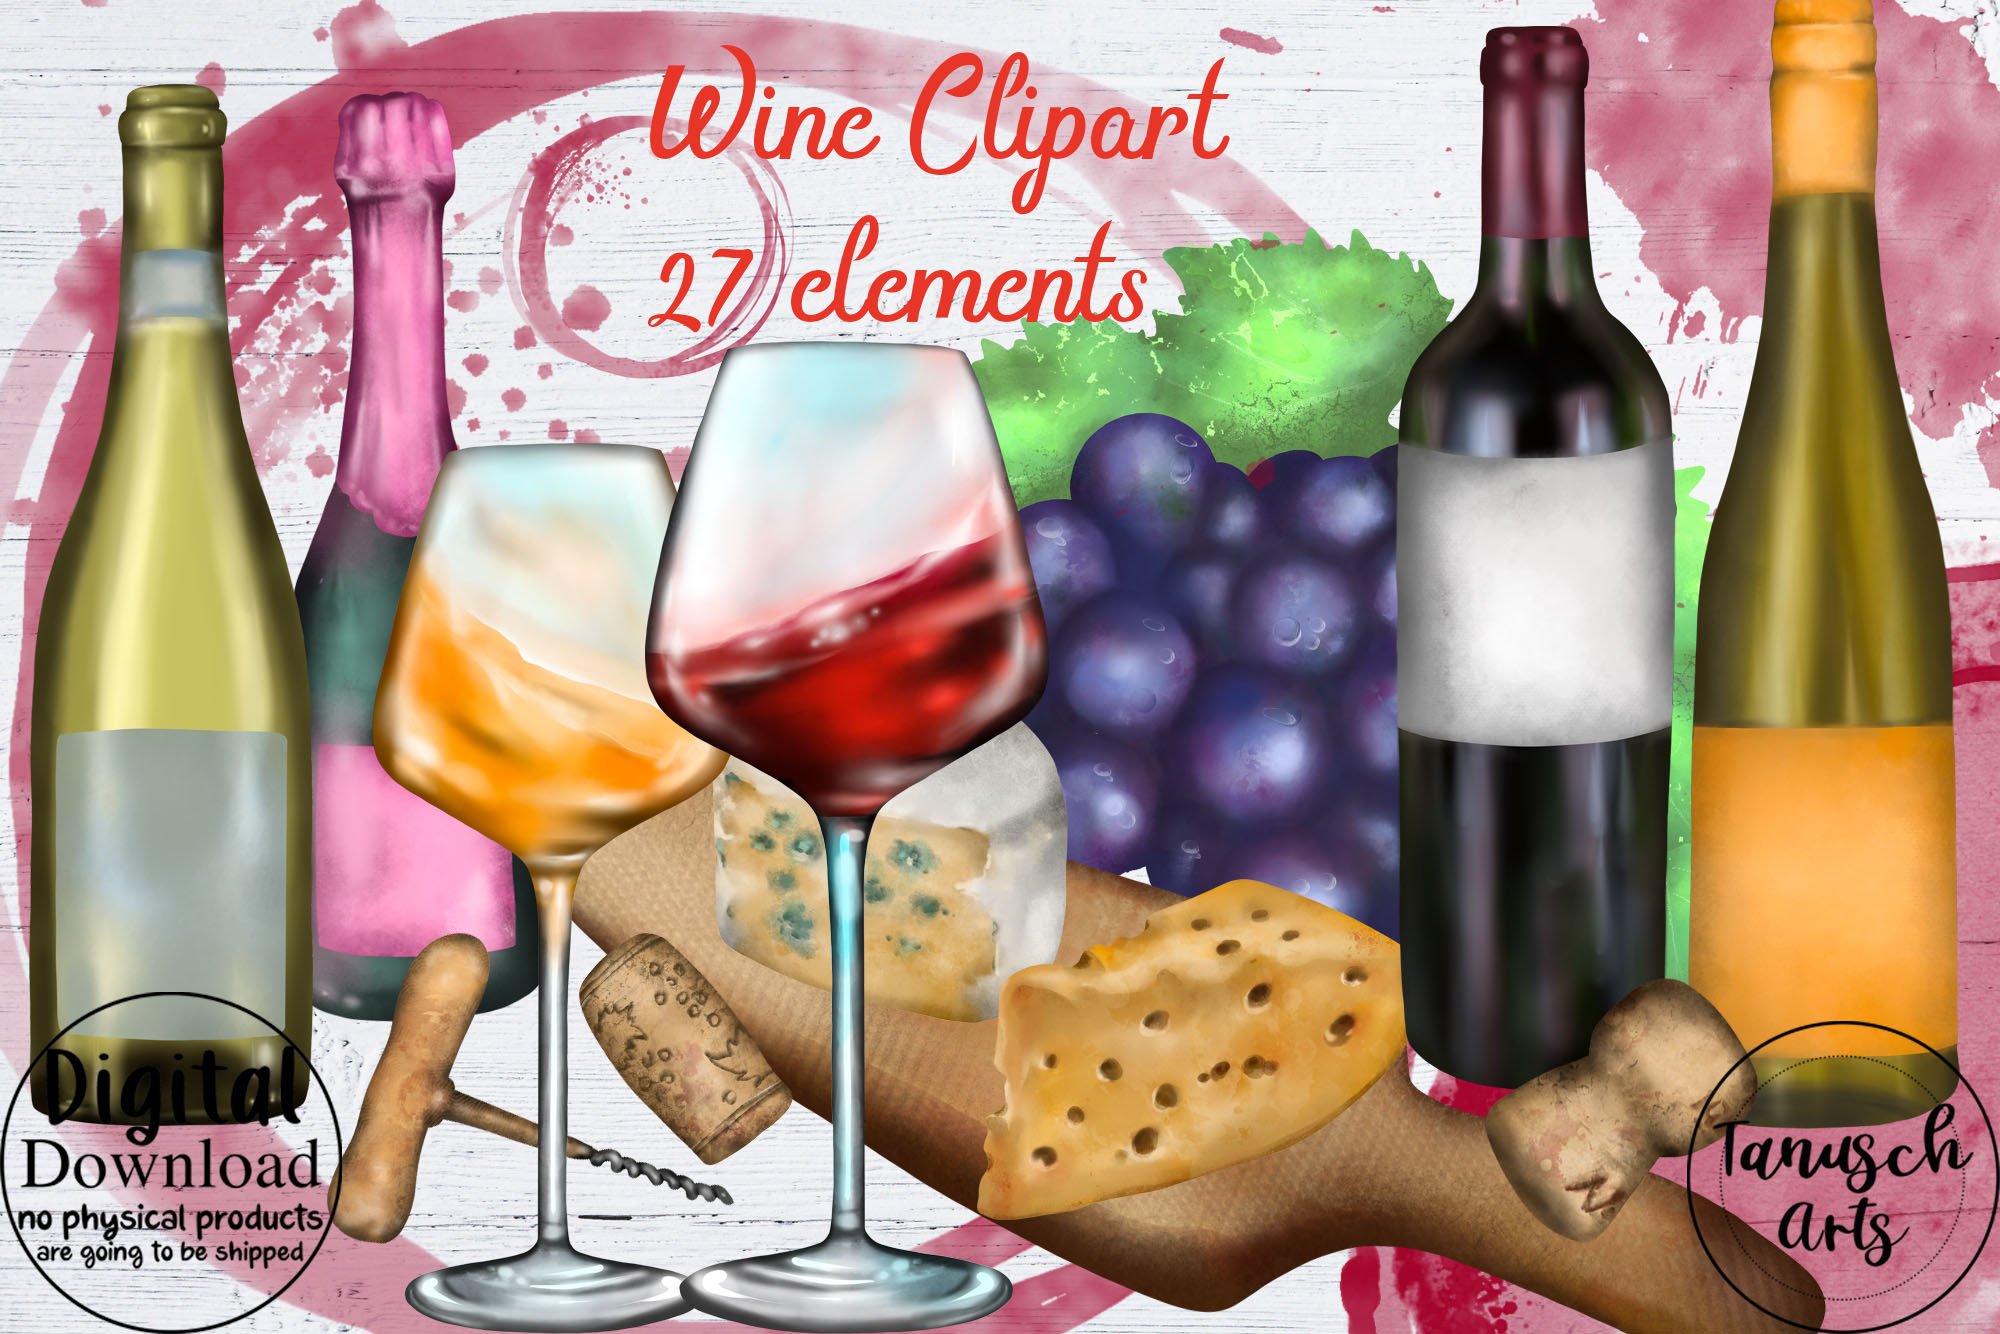 Wine Clipart Watercolor &mixed media cover image.